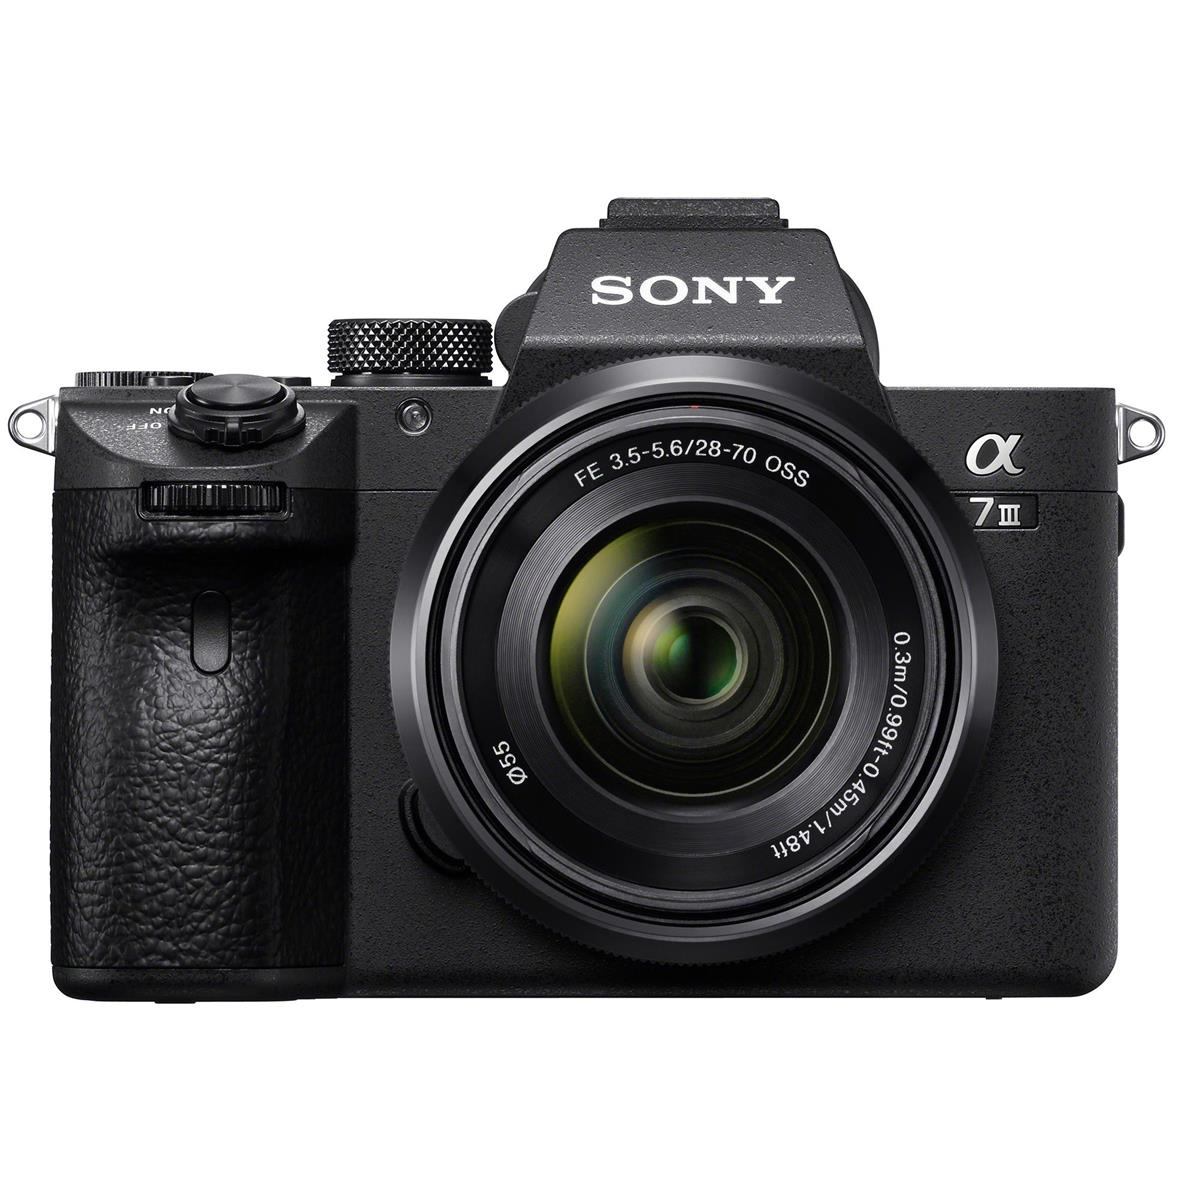 Just Announced – Sony A73 Mirrorless Camera